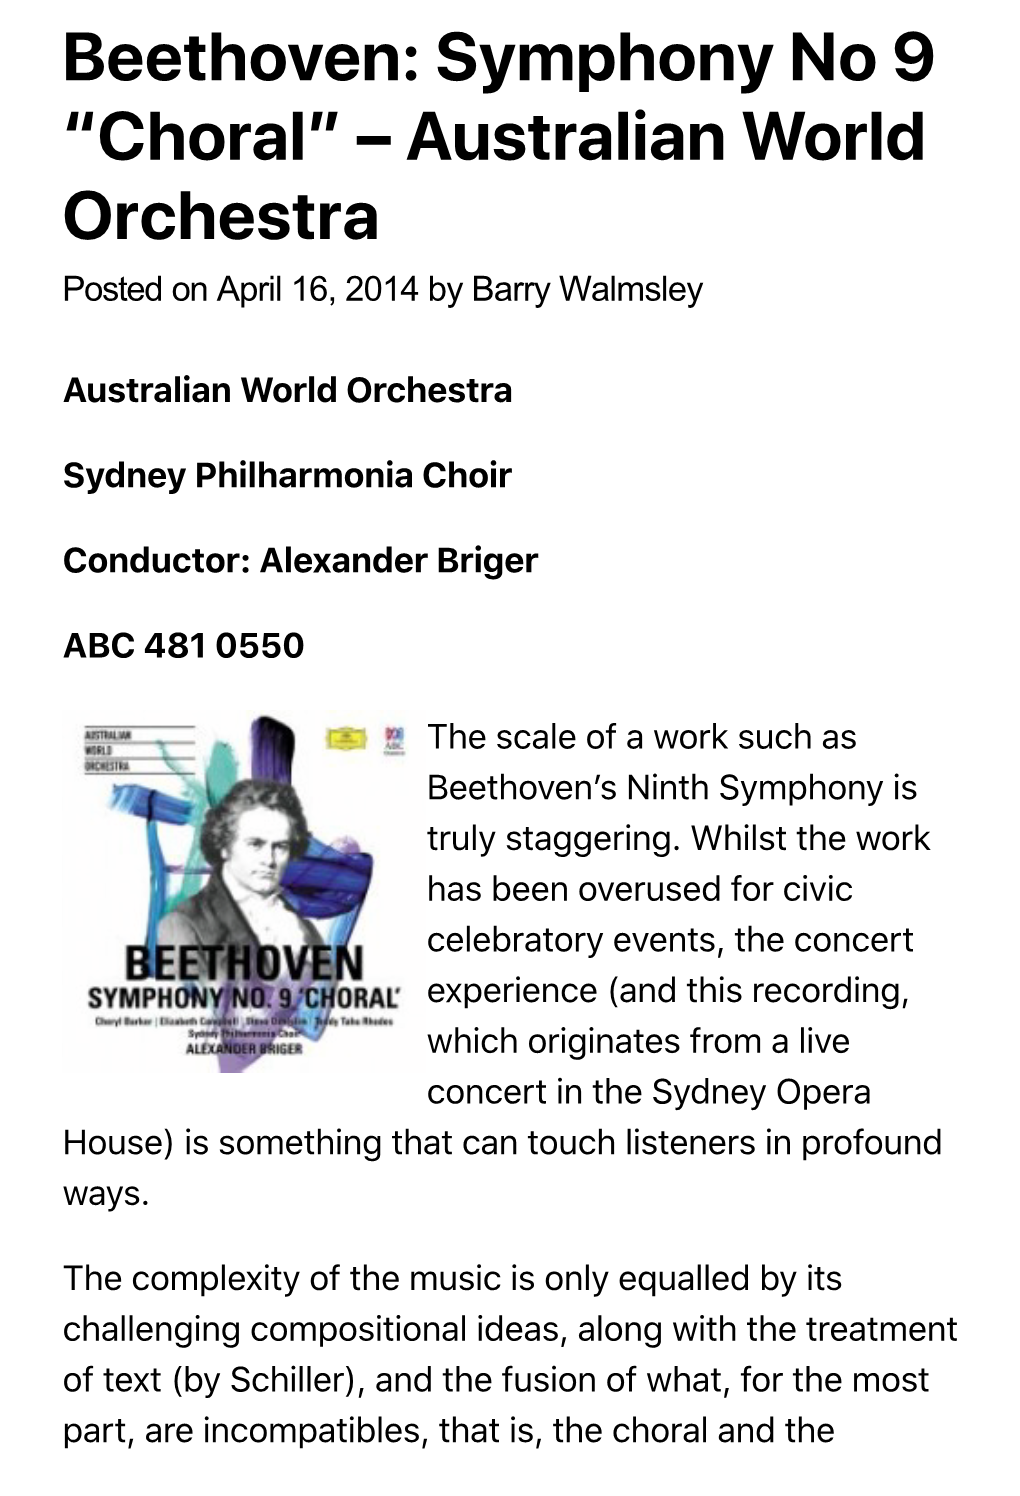 Beethoven: Symphony No 9 “Choral” – Australian World Orchestra Posted on April 16, 2014 by Barry Walmsley